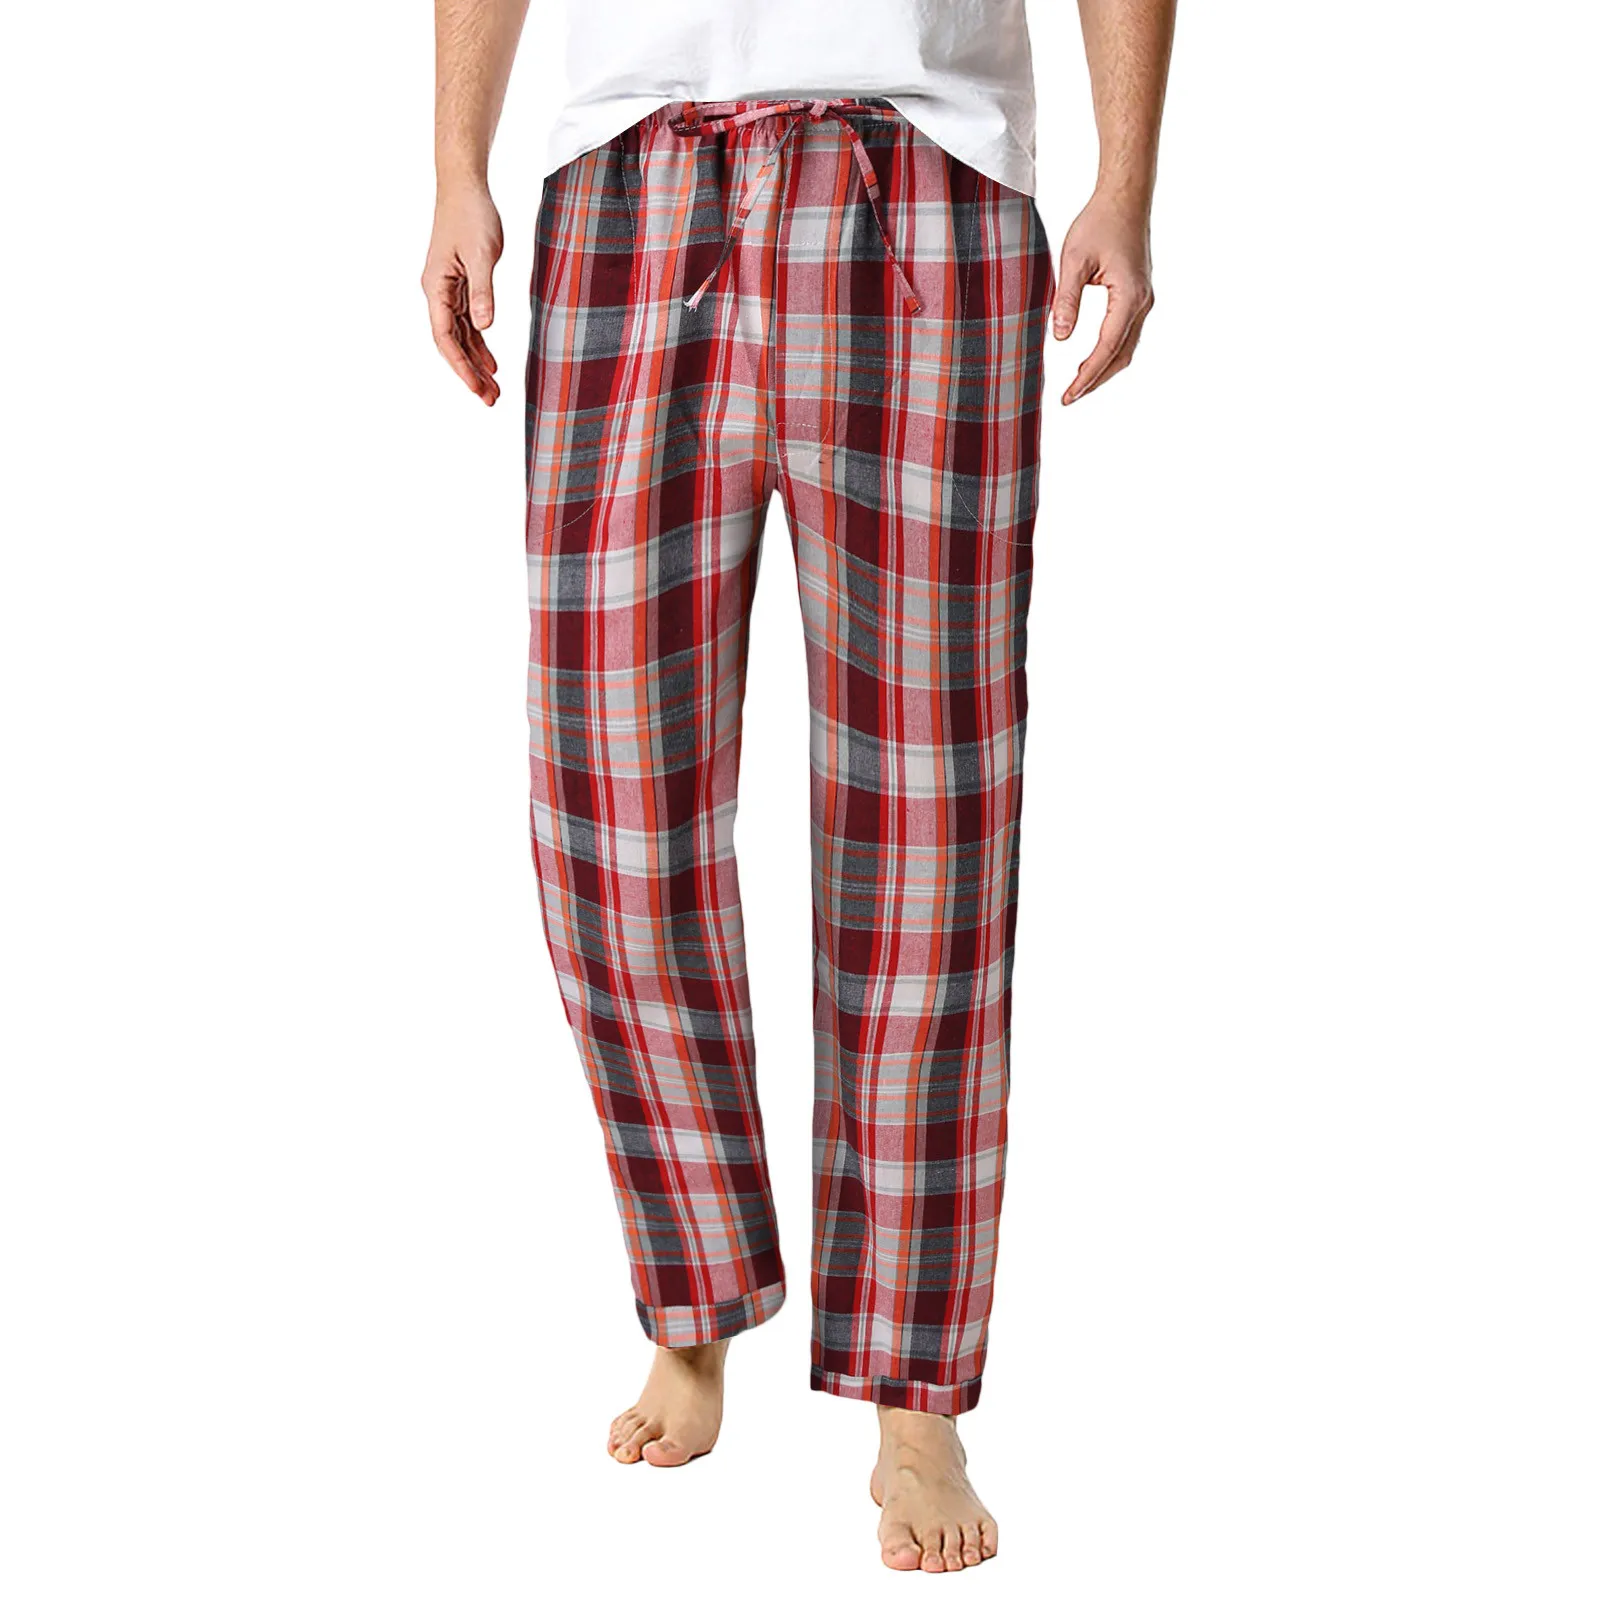 

Men's Fashion Casual Large Plaid Lace Pants high quality Cotton Can Be Worn Outside Pajamas Home Pants mens clothing pantalones